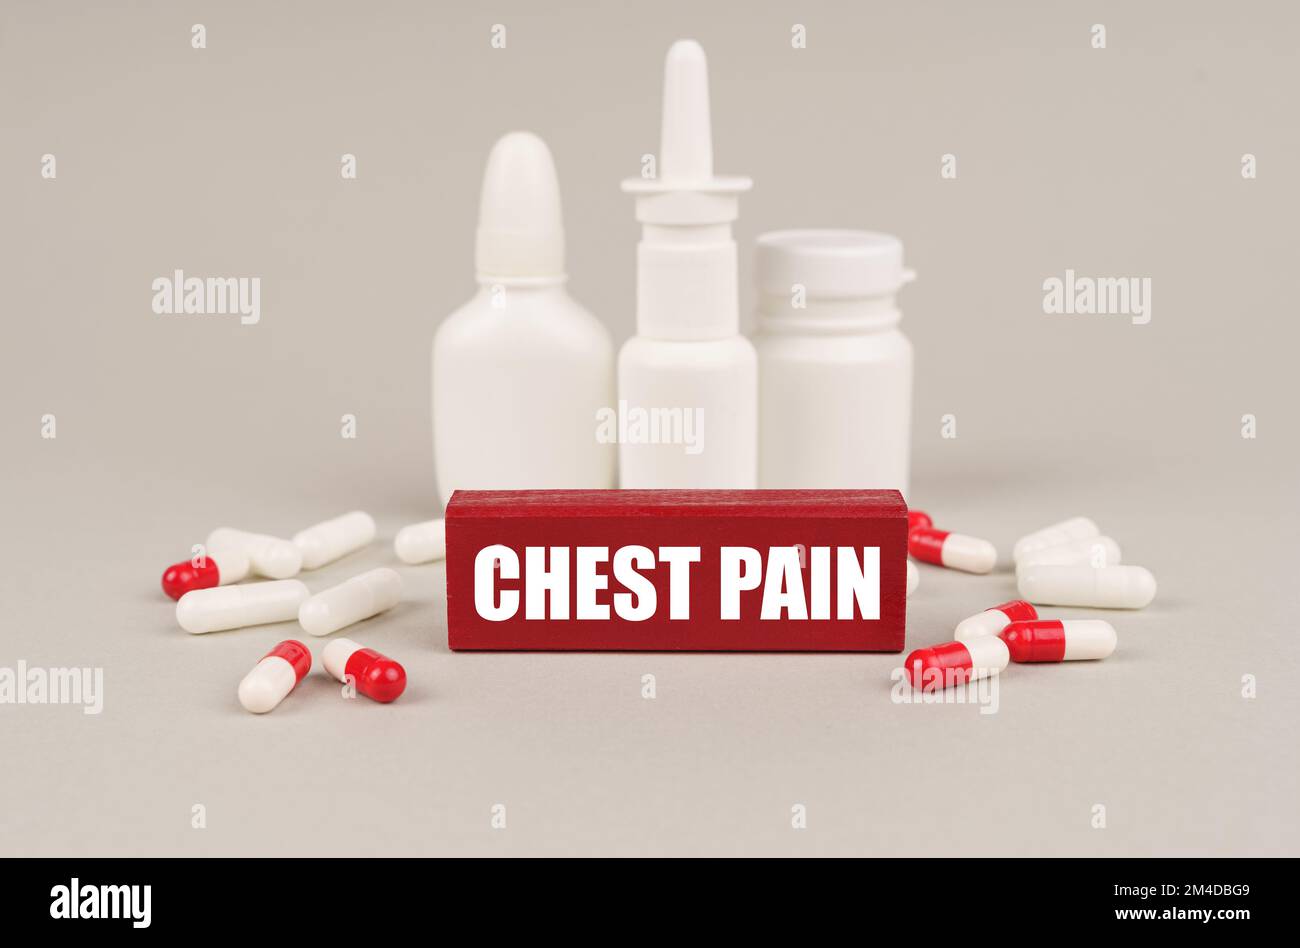 Medical concept. On a gray surface are pills, white jars and a red wooden block with the inscription - Chest pain Stock Photo